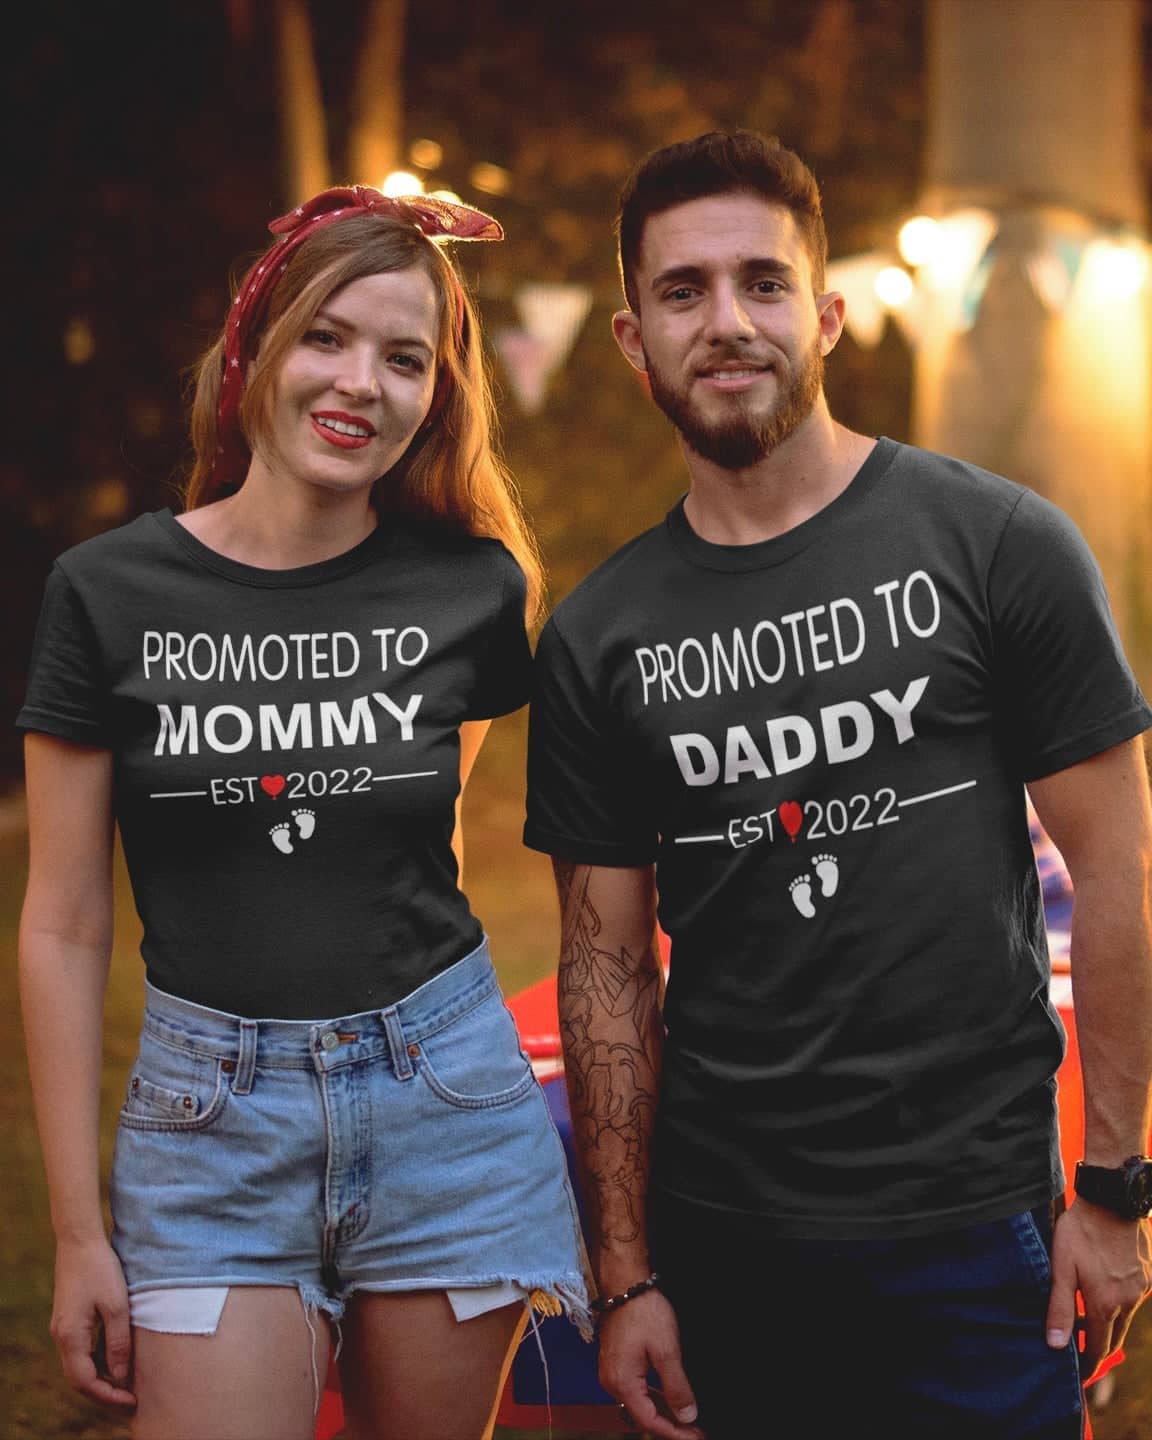 Promoted to Mommy Est. 2022 Special T Shirt for Women freeshipping - Catch My Drift India